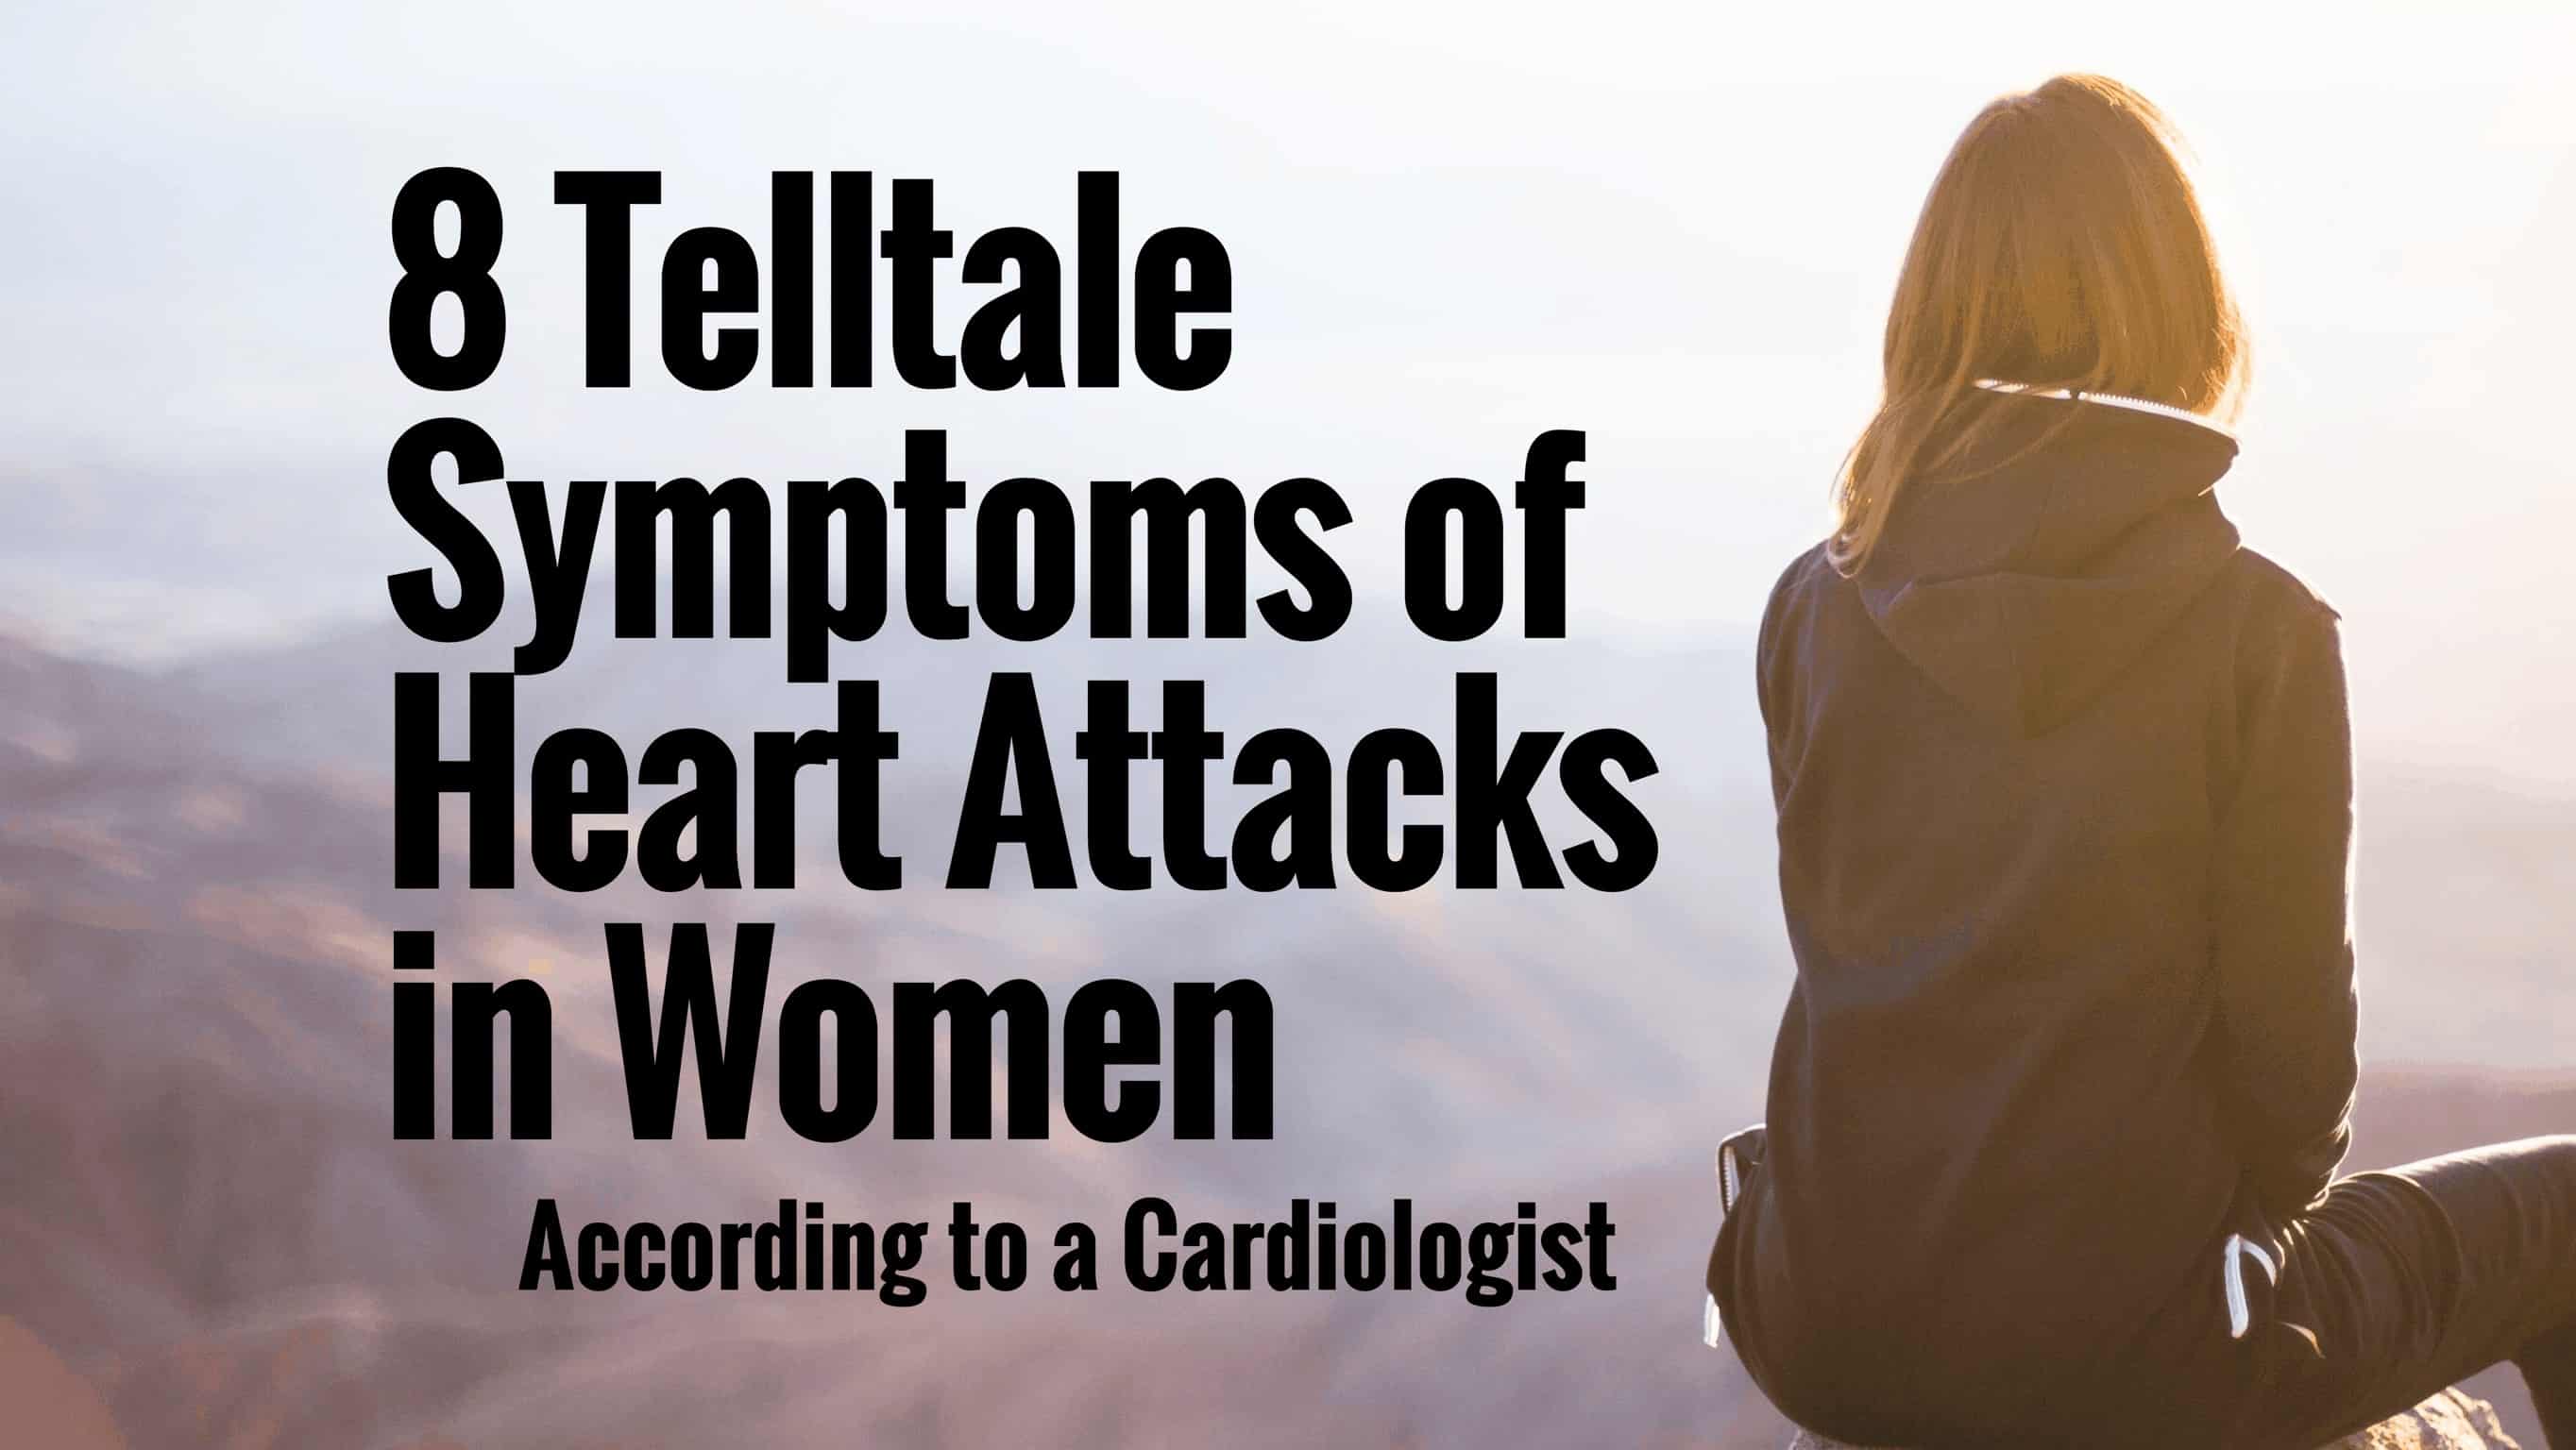 8 Telltale Symptoms of Heart Attacks in Women According to a Cardiologist